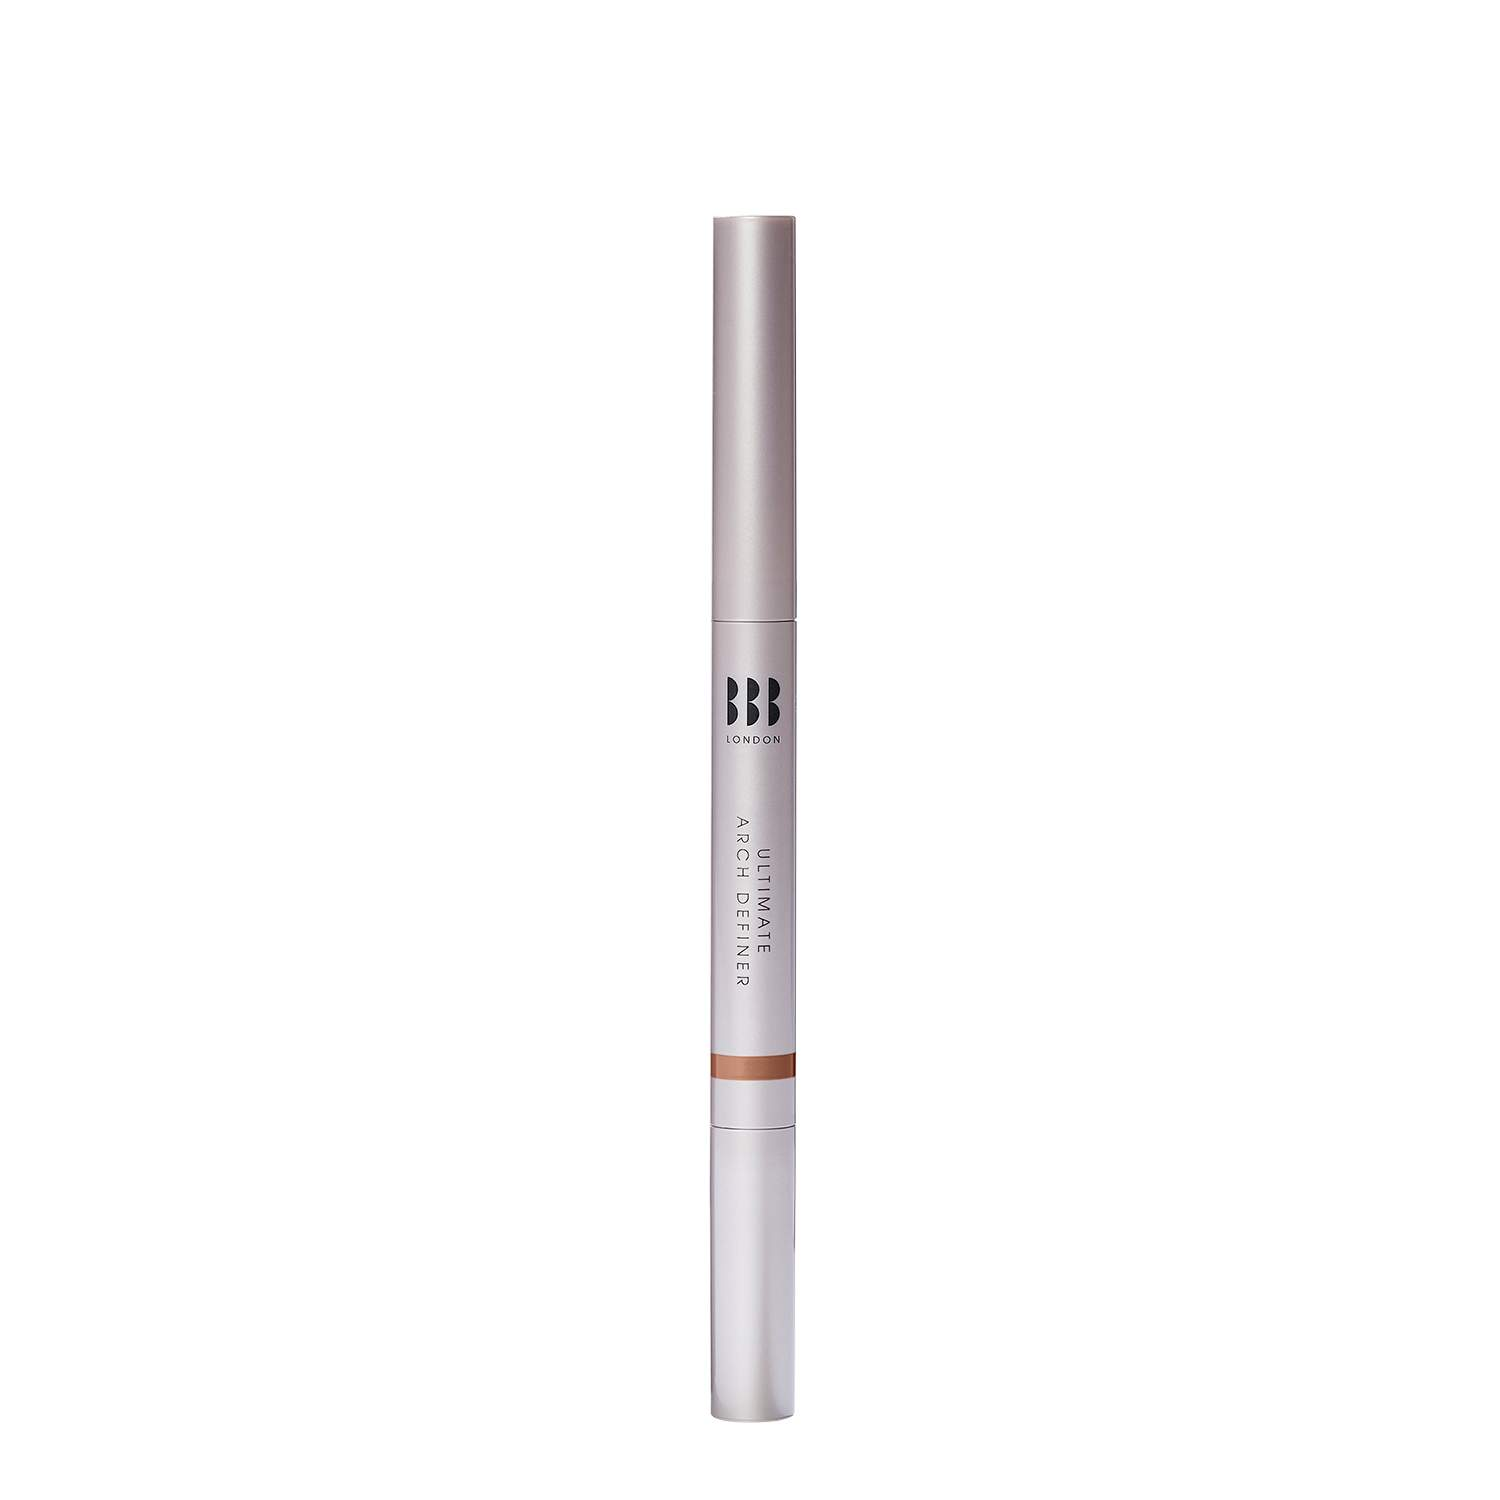 BBB London Ultimate Brow Arch Definer BBB London Ultimate Brow Arch Definer - Sandalwood 1